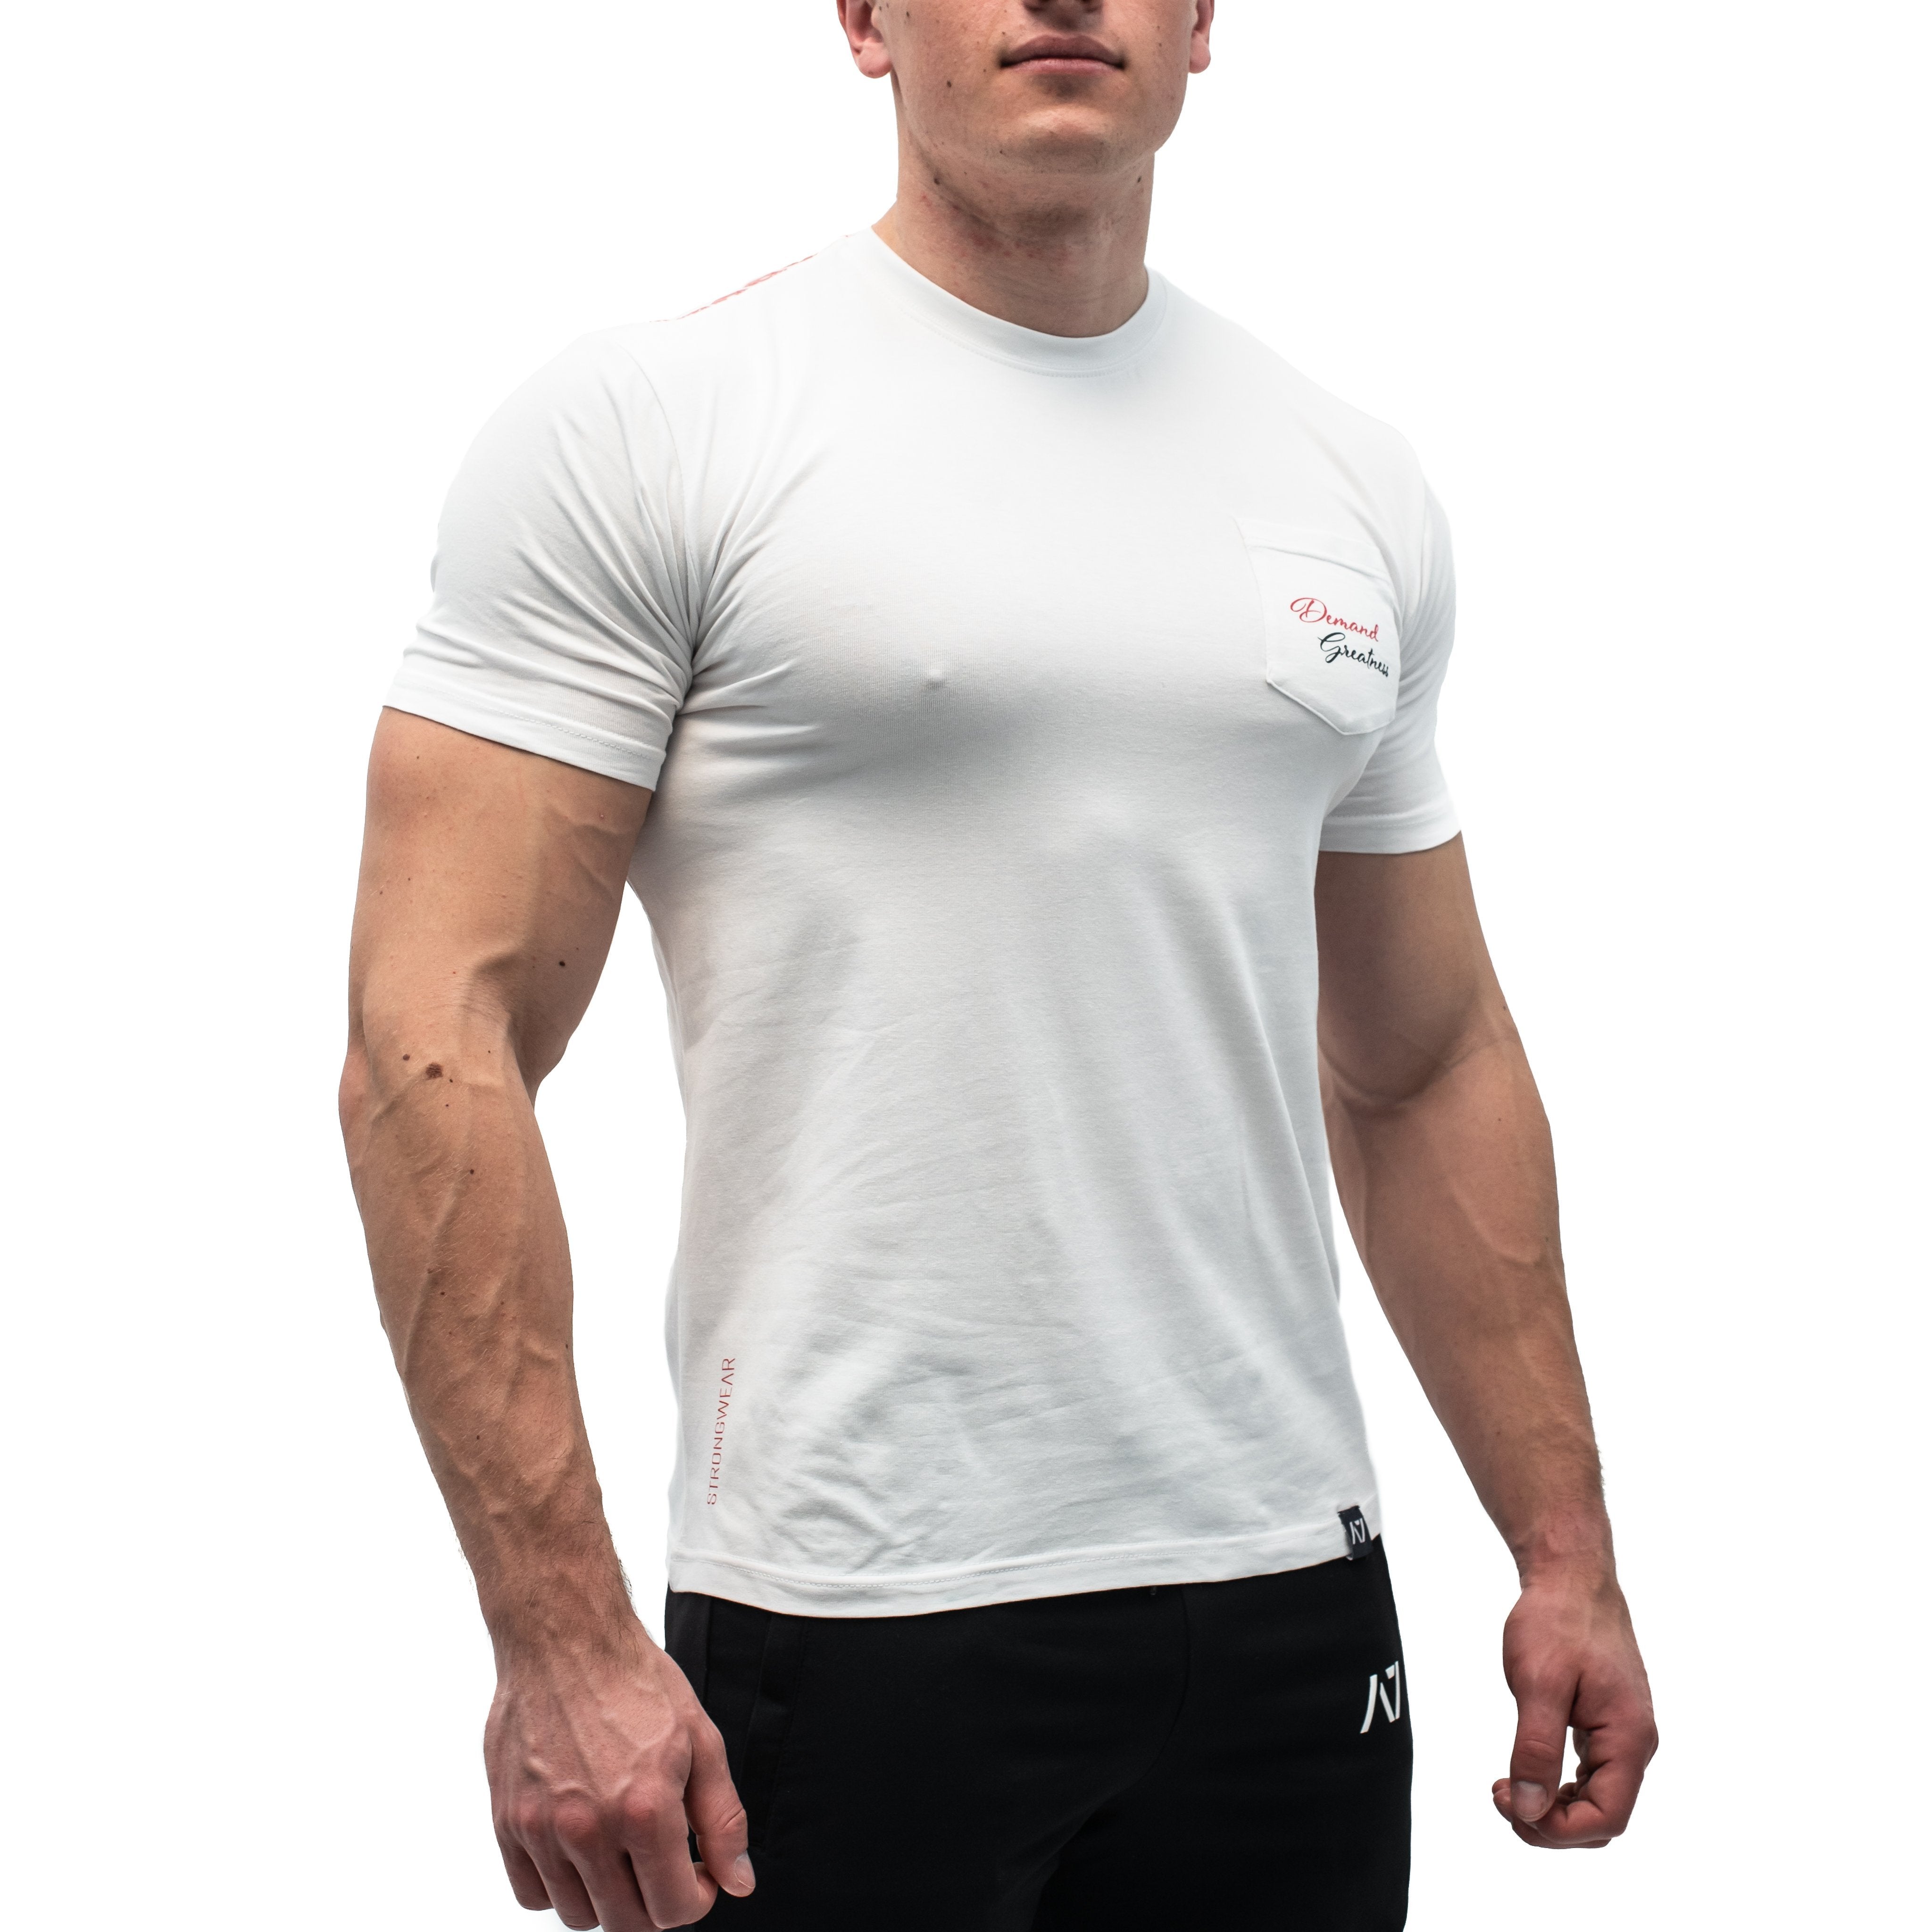 In The Pocket Bar Grip T-shirt, great as a squat shirt. Purchase In The Pocket Bar Grip tshirt UK from A7 UK or A7 Europe. No more chalk and no more sliding. Best Bar Grip Tshirts, shipping to UK and Europe from A7 UK or A7 Europe. The best Powerlifting apparel for all your workouts. Available in UK and Europe including France, Italy, Germany, Sweden and Poland